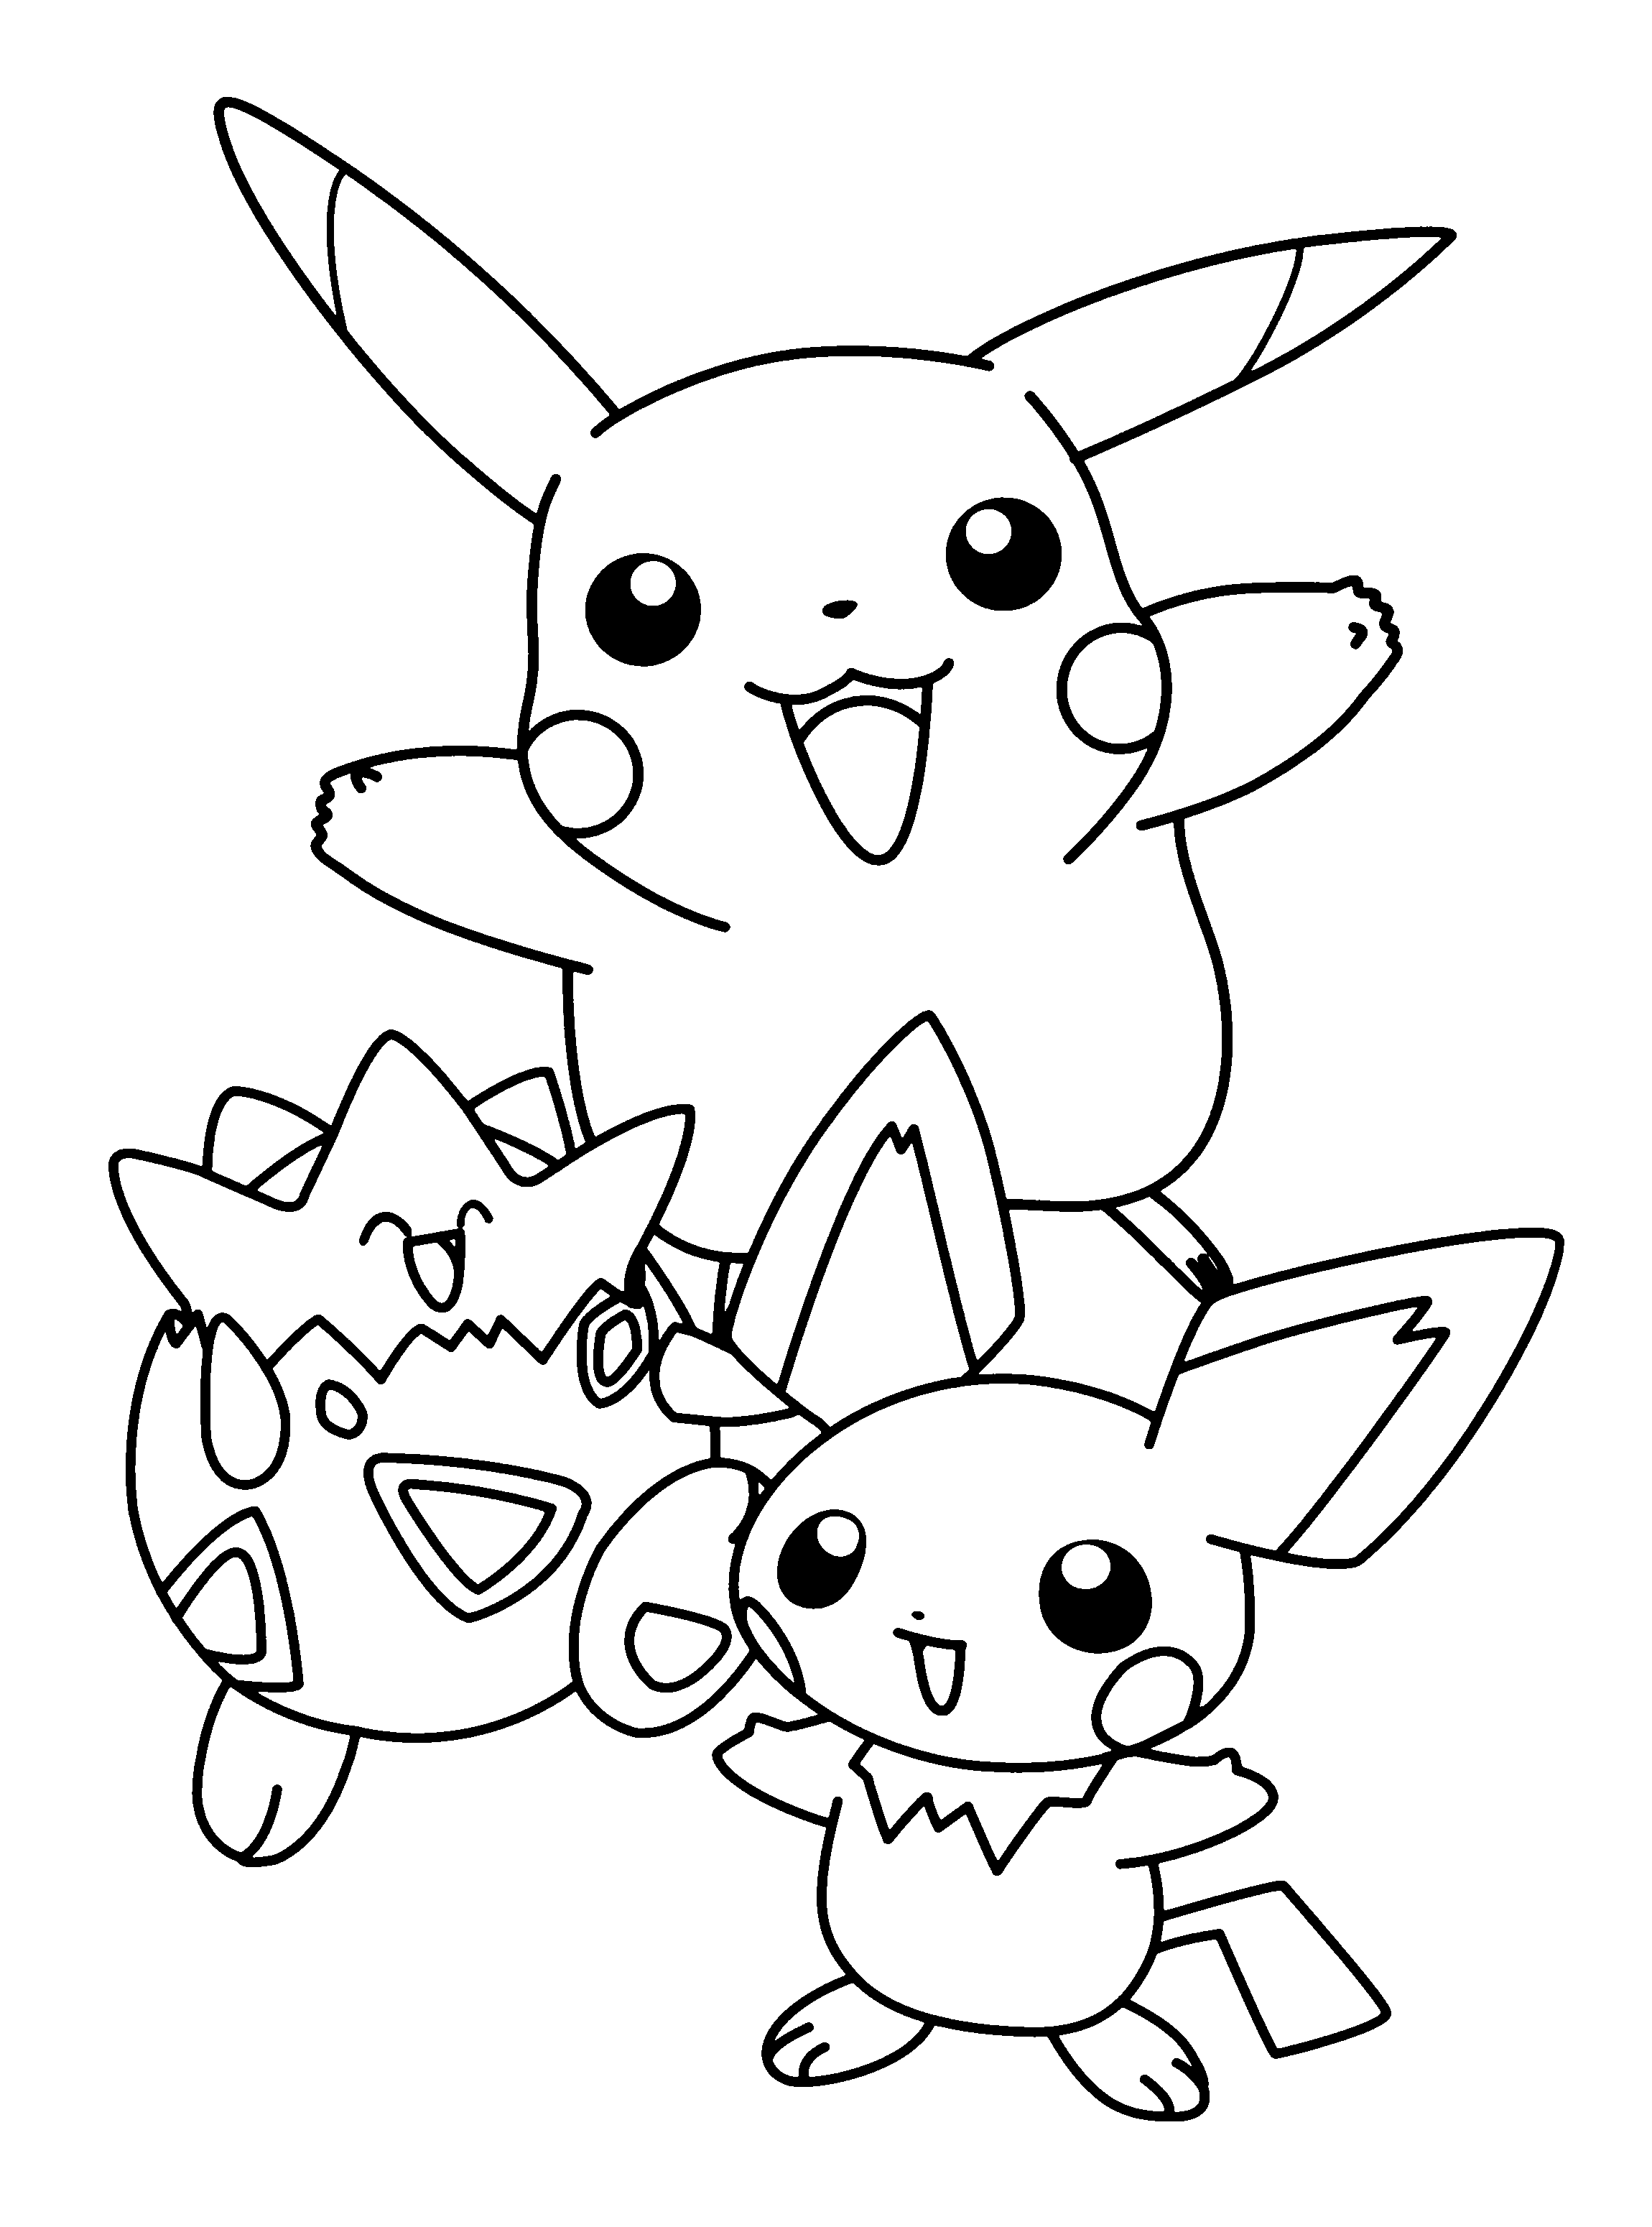 Pokemon free to color for kids   All Pokemon coloring pages Kids ...